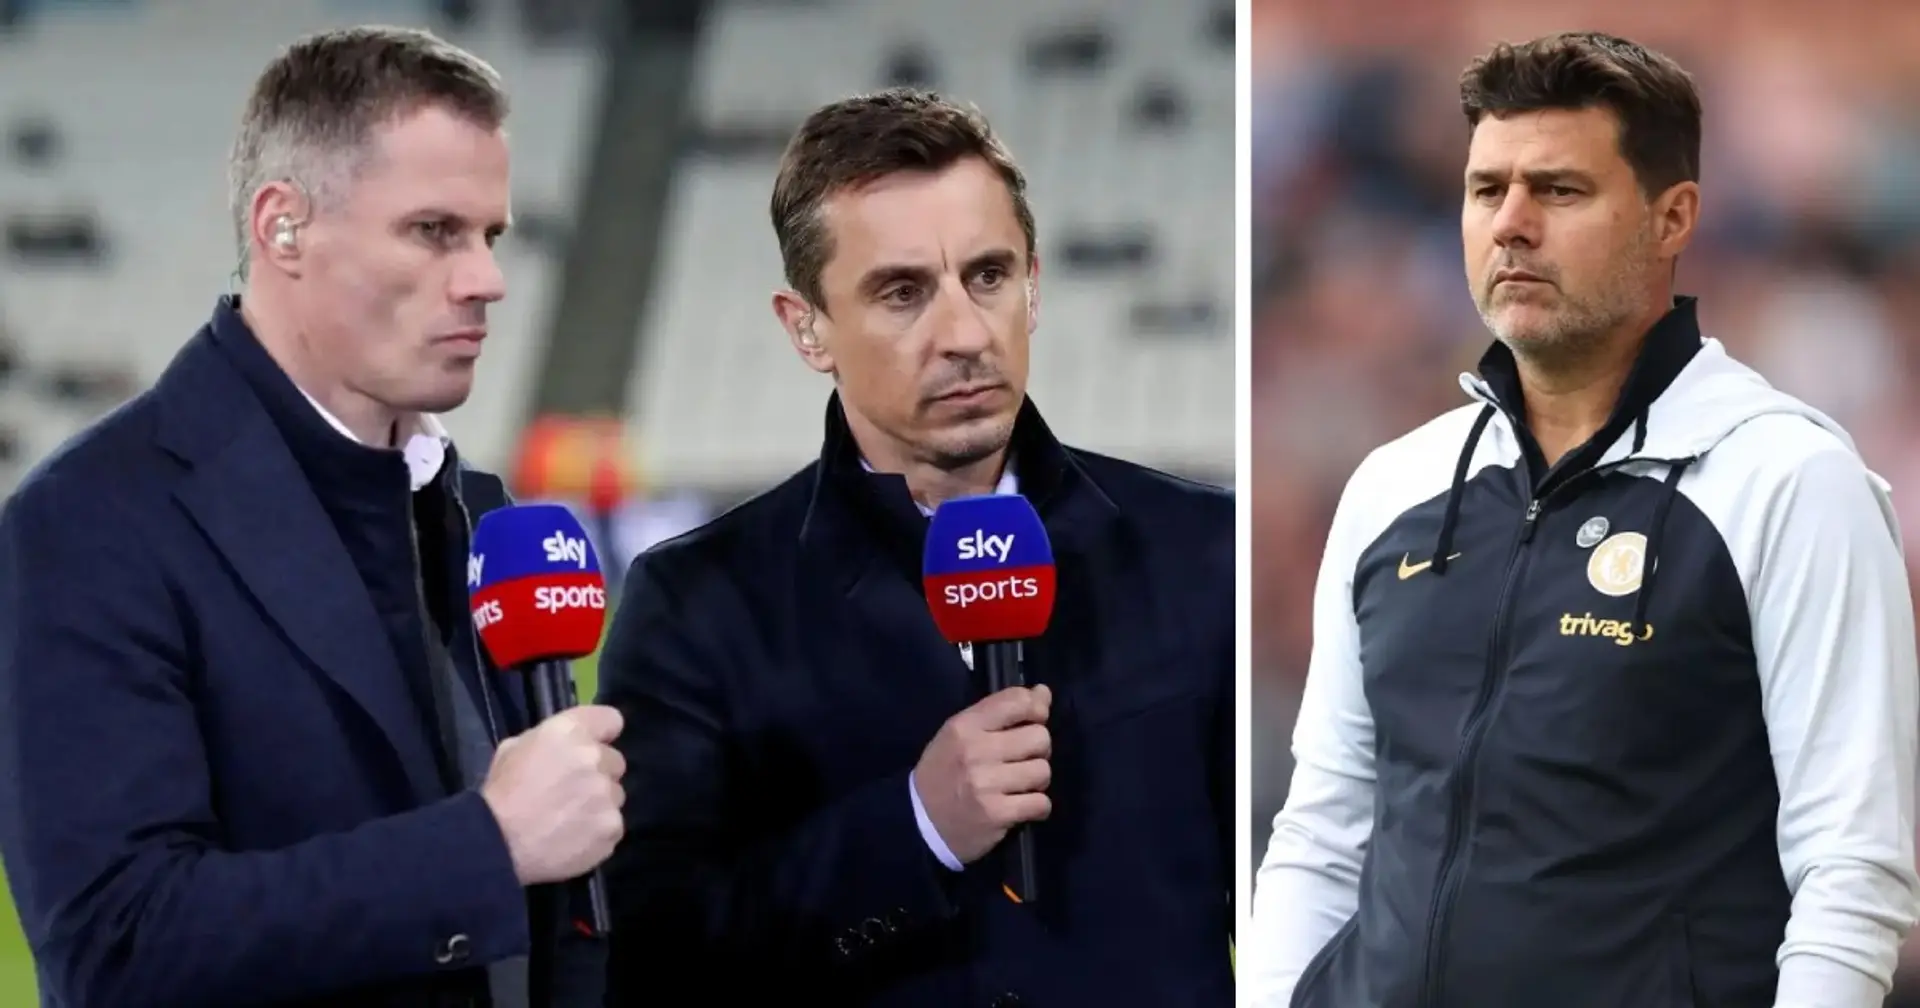 'They aren't scoring up there': Neville and Carragher predict Chelsea to lose against Newcastle